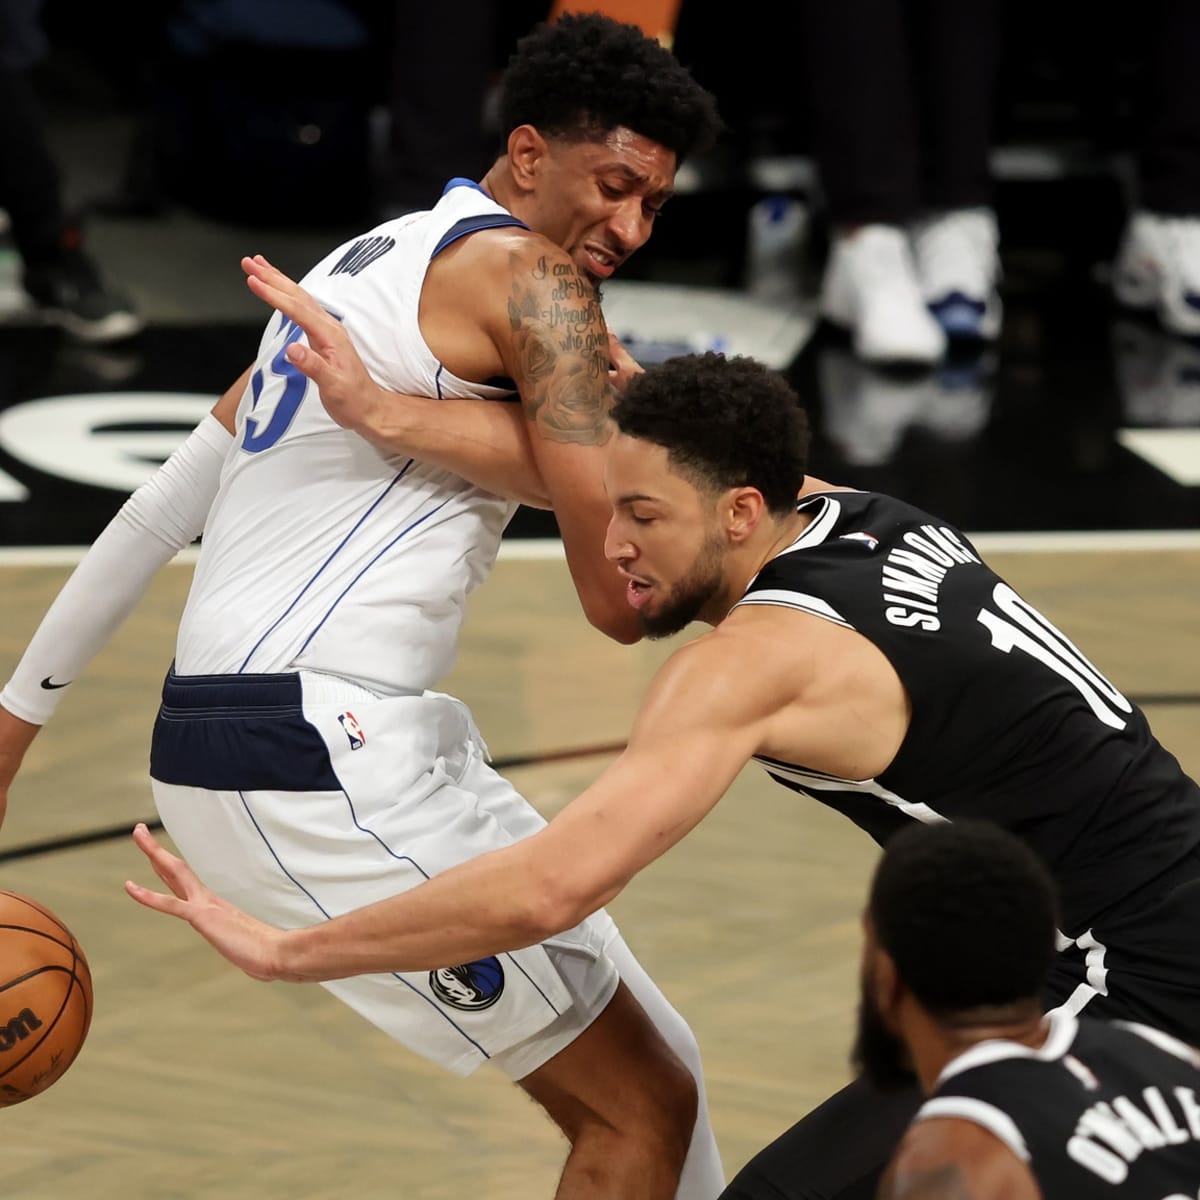 Brutal Ben Simmons injury update draws mixed reactions from Nets fans, NBA  Twitter